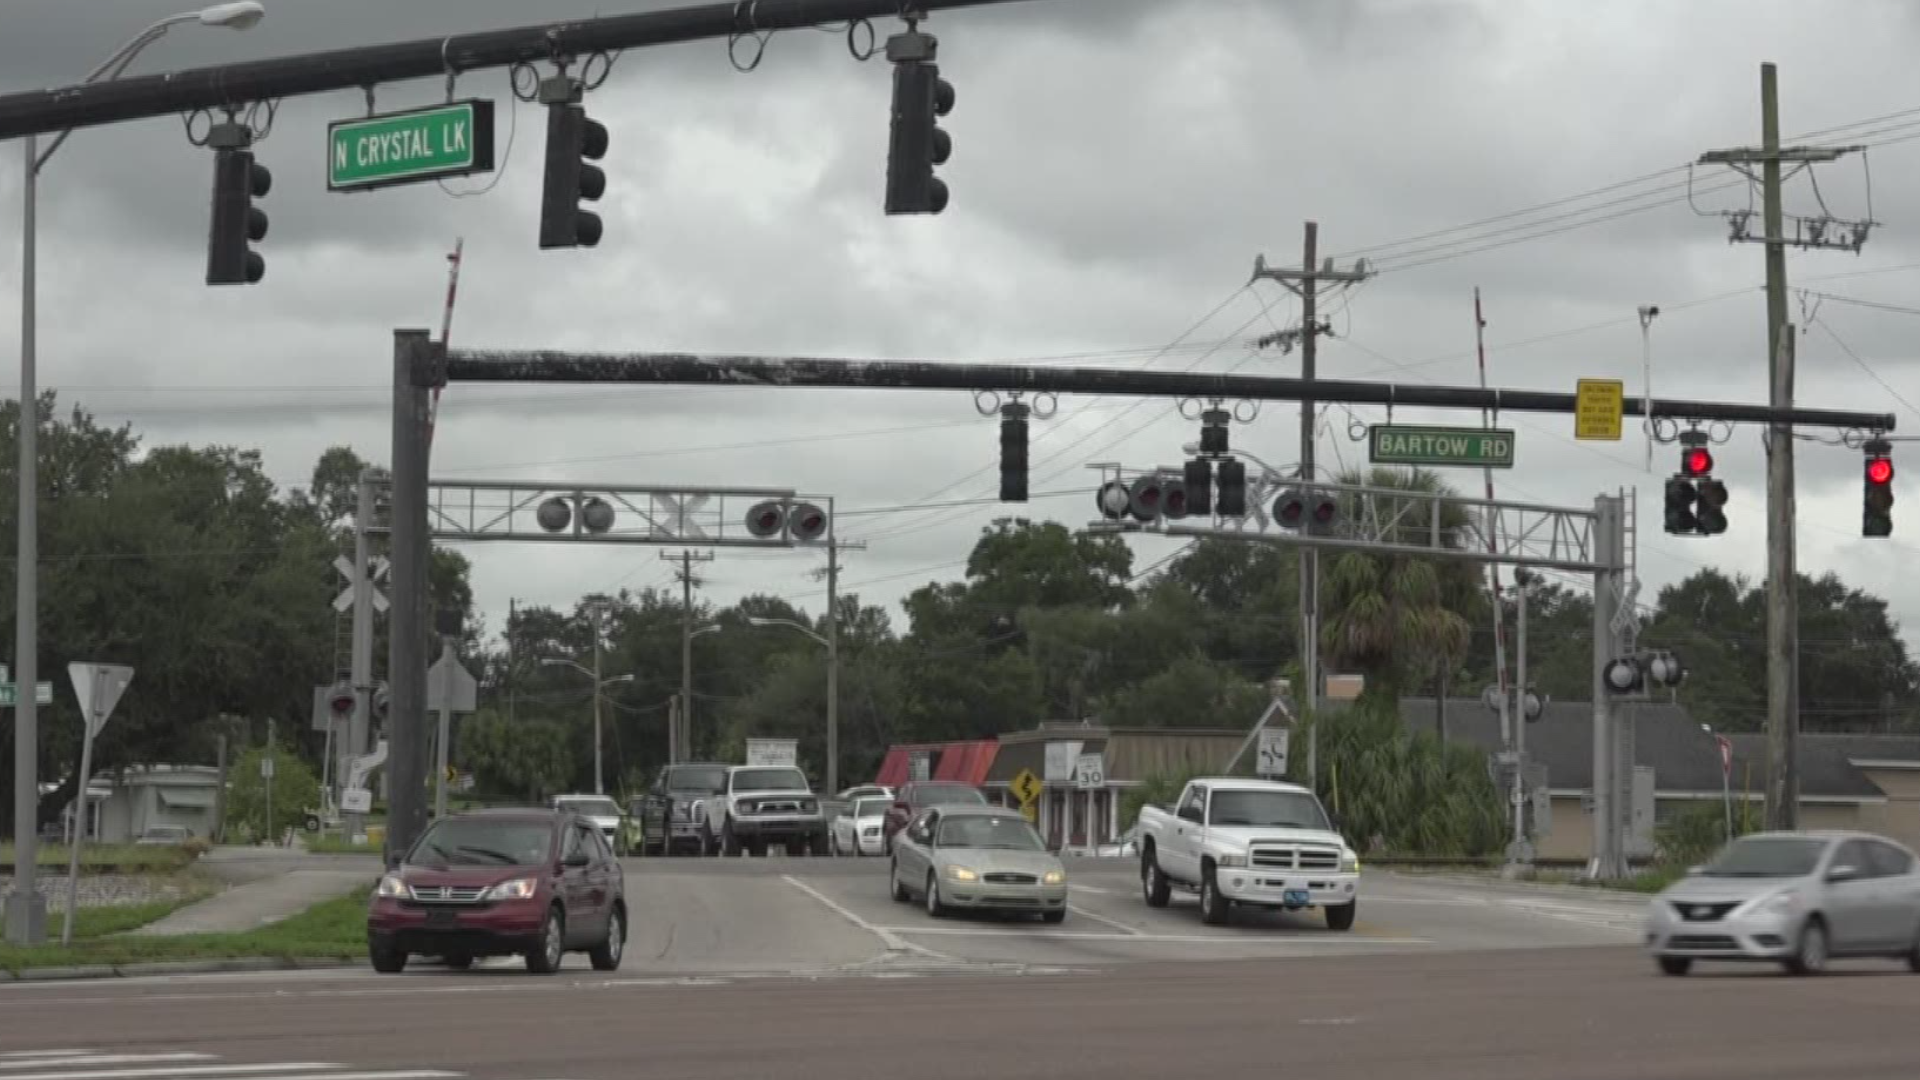 Lakeland has a red light running problem. In 2018, nearly 3,000 drivers were cited at the intersection of North Crystal Lake Drive and U.S. 98 alone. That's why the Traffic Operations and Parking Services Division of the City of Lakeland is focusing on that intersection for their pilot program.